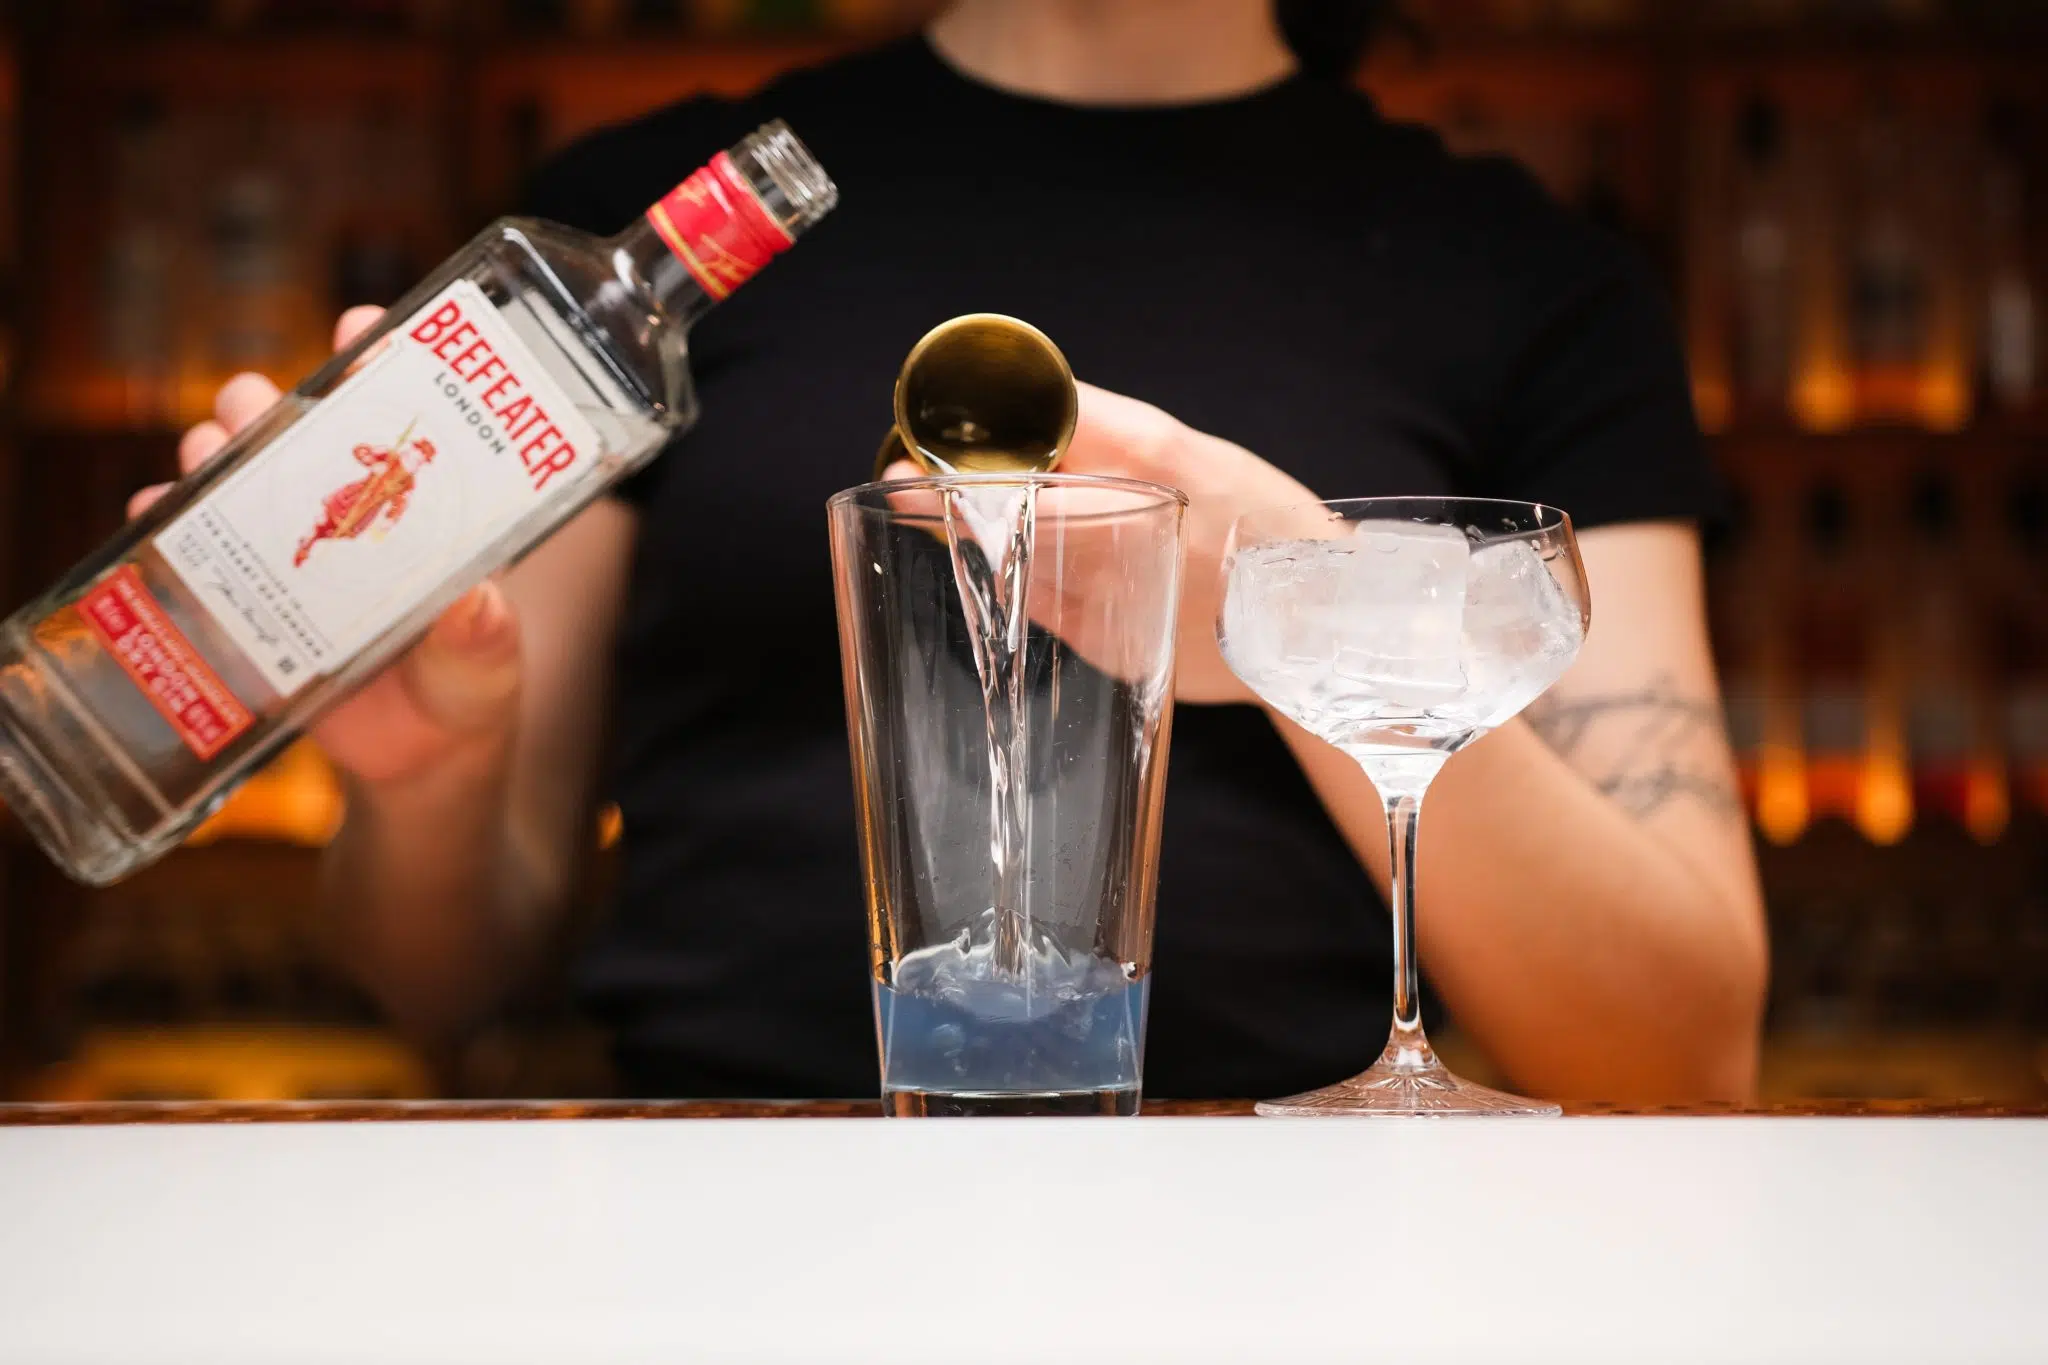 <p>Next, pour 2 oz of Gin into the shaker. Gin acts as the foundational spirit for this cocktail, providing its distinctive botanical flavor.</p>
